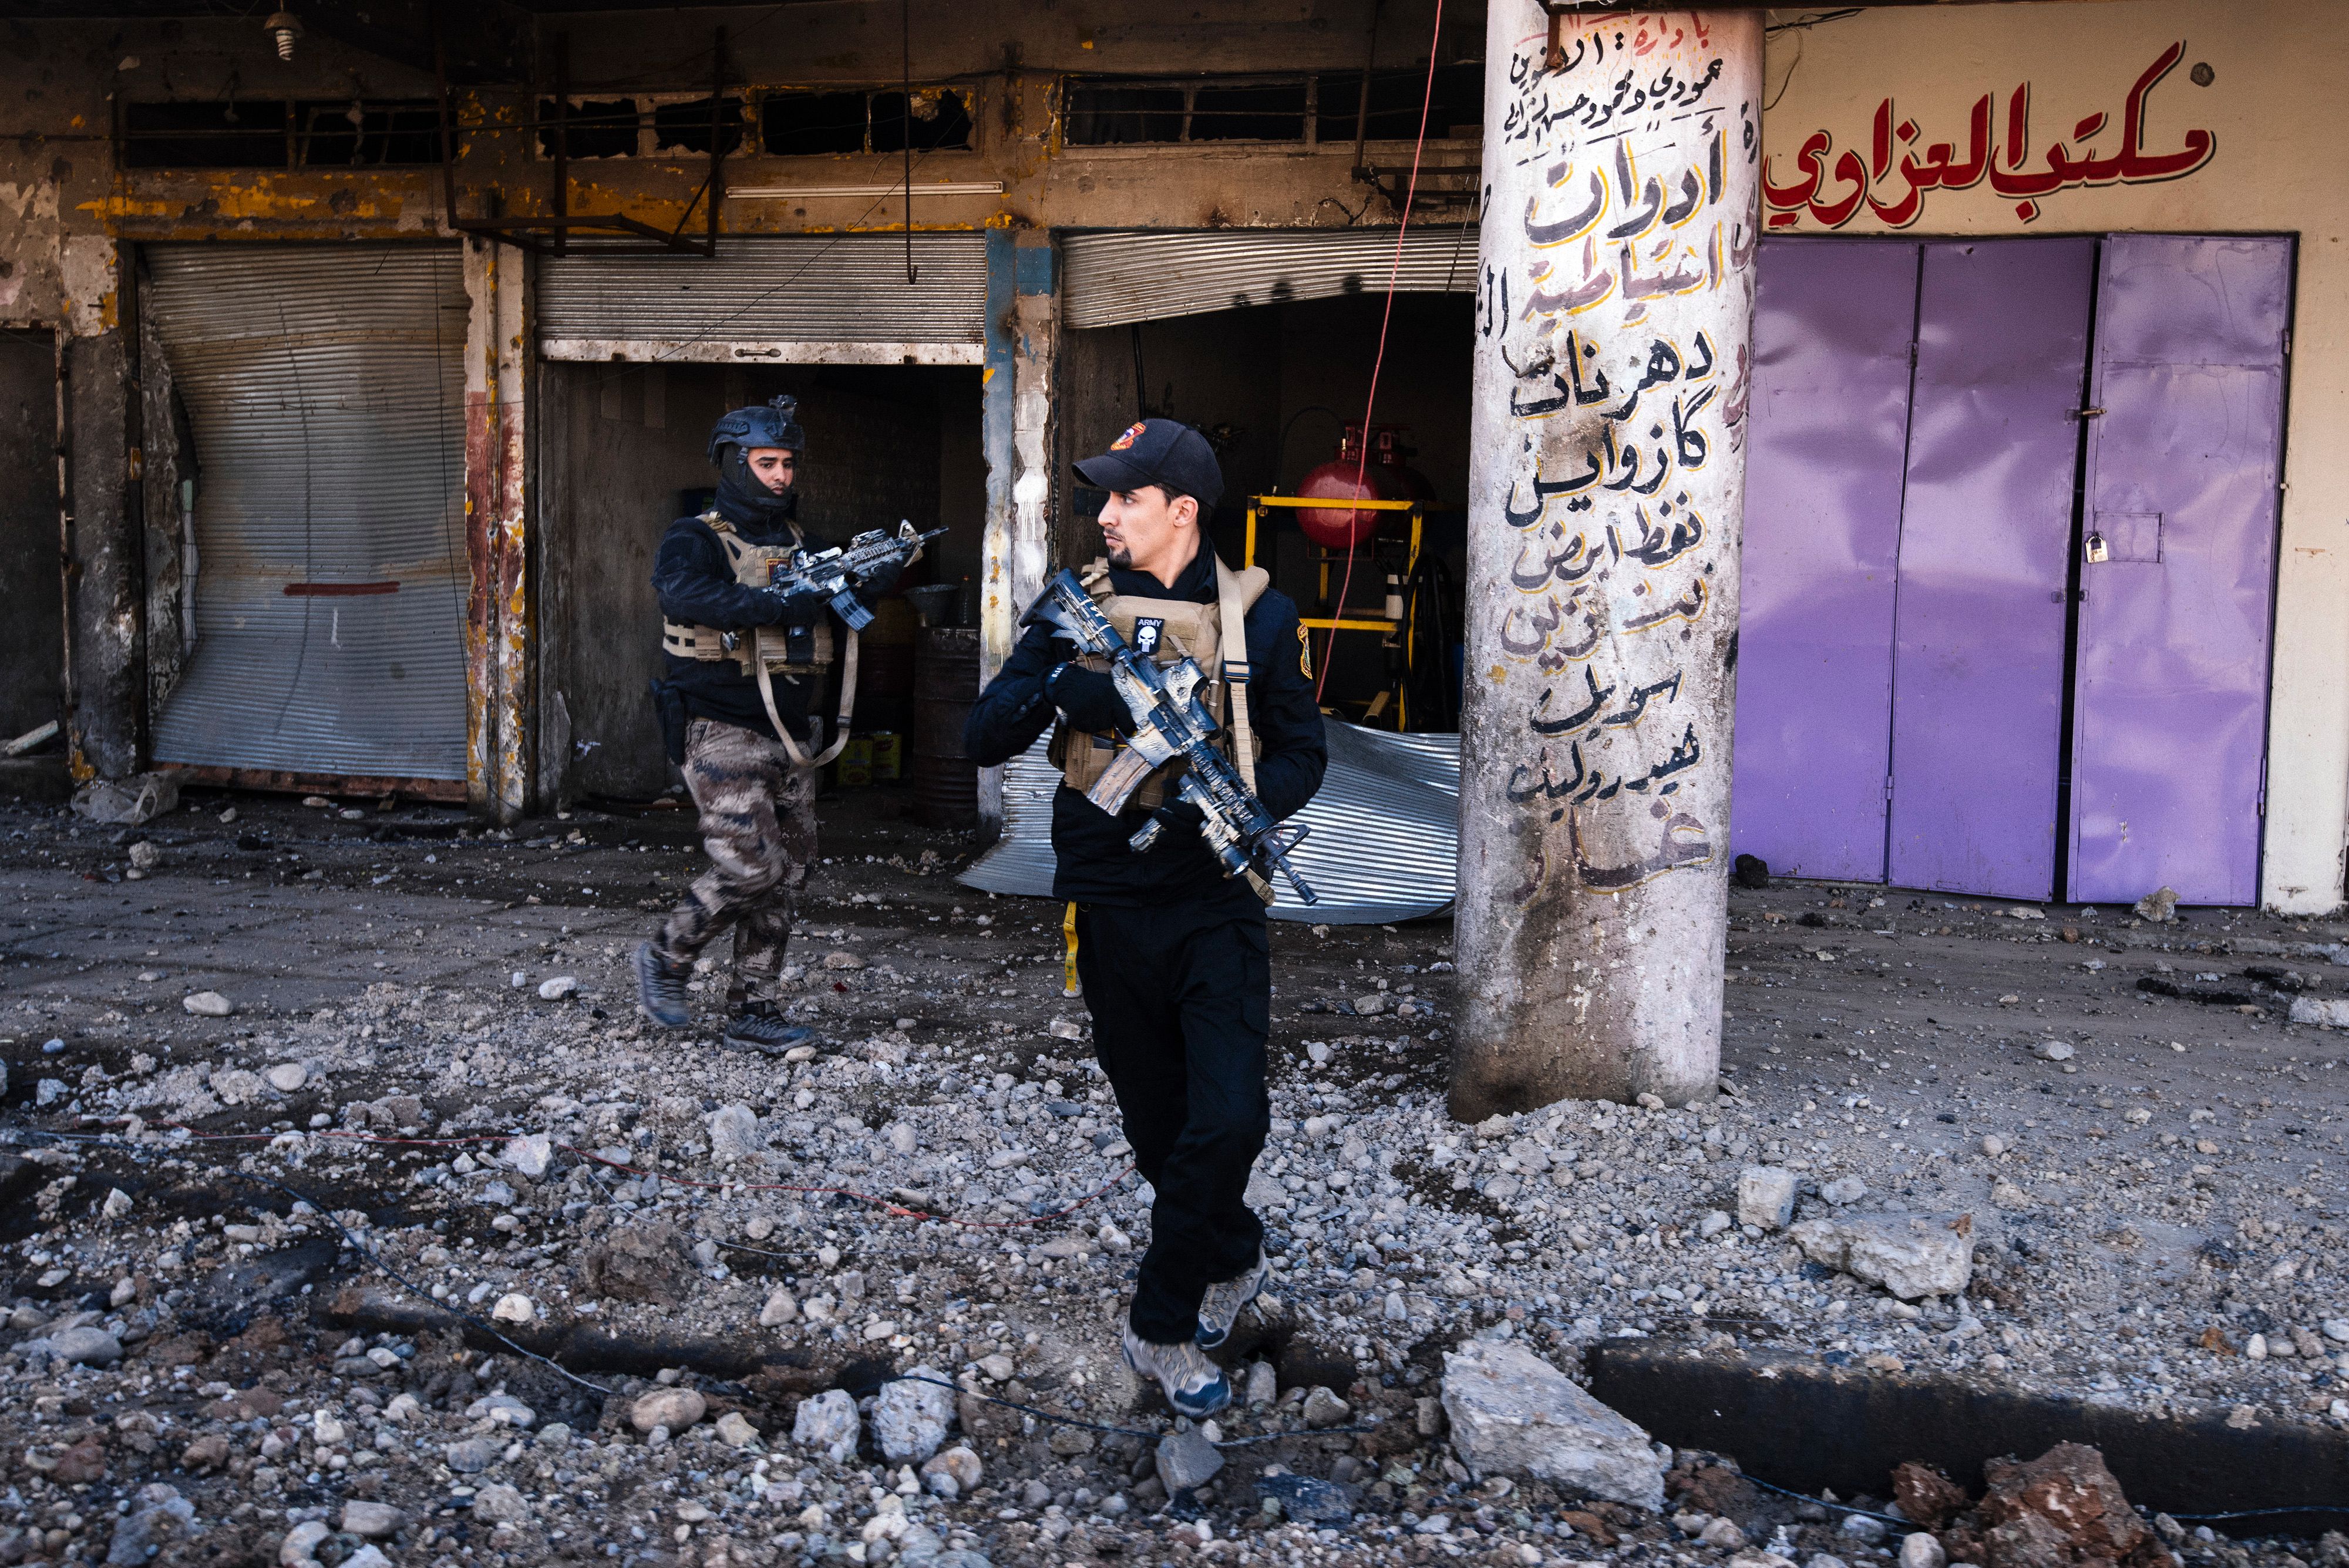 TOPSHOT - Members of the Iraqi special forces Counter Terrorism Service (CTS) walk next to destroyed shops in eastern Mosul on January 18, 2017. Iraqi forces have fully retaken east Mosul fro